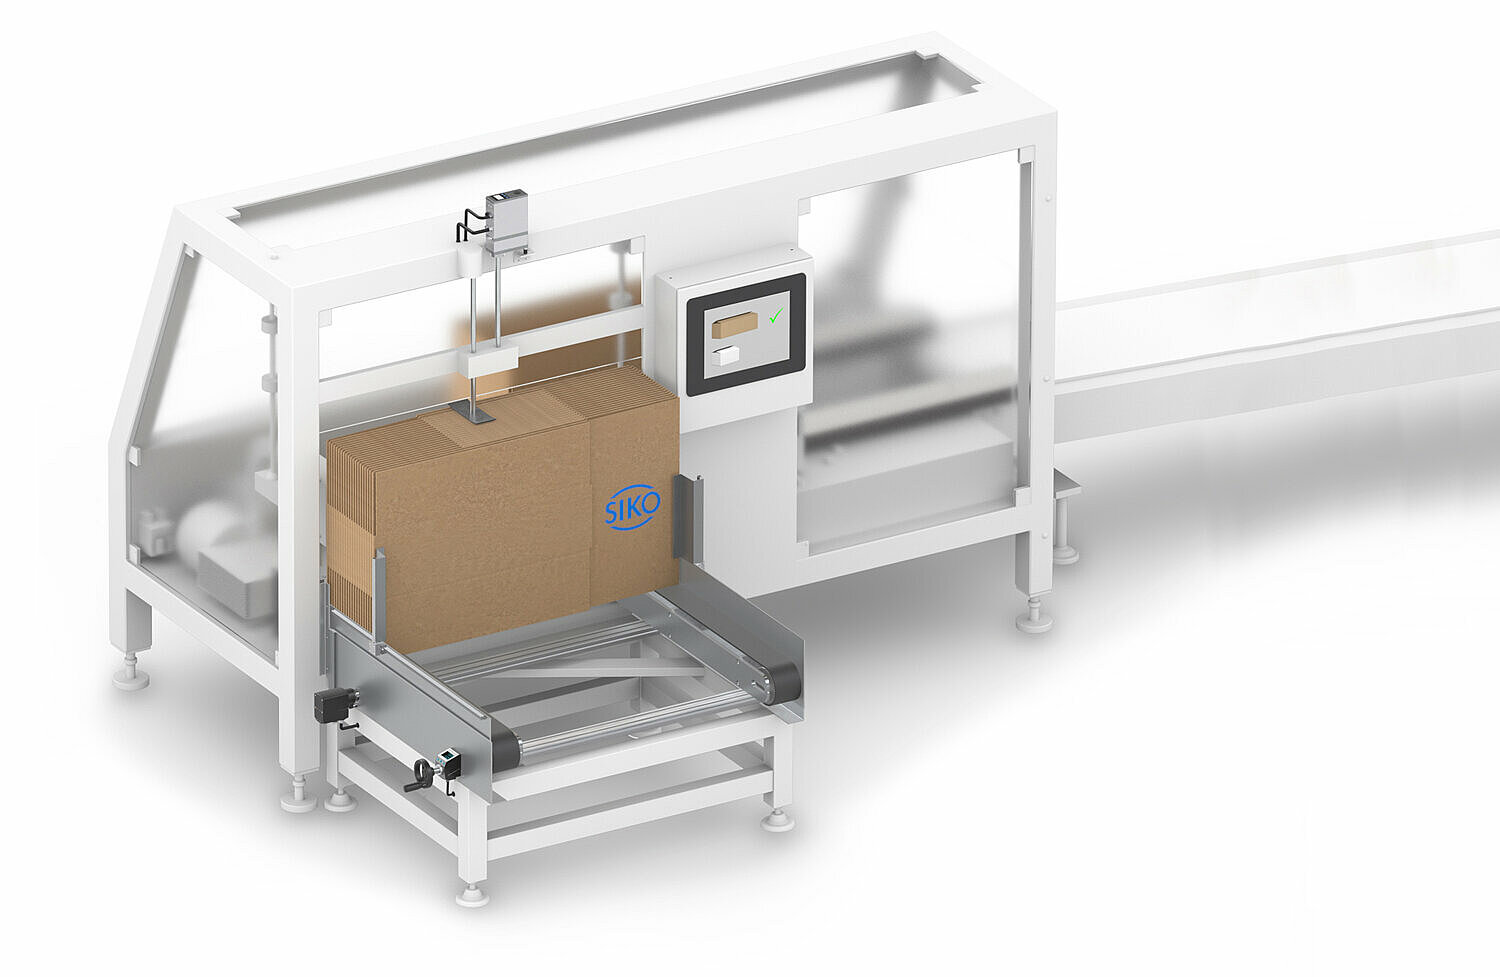 SIKO positioning systems for carton erectors